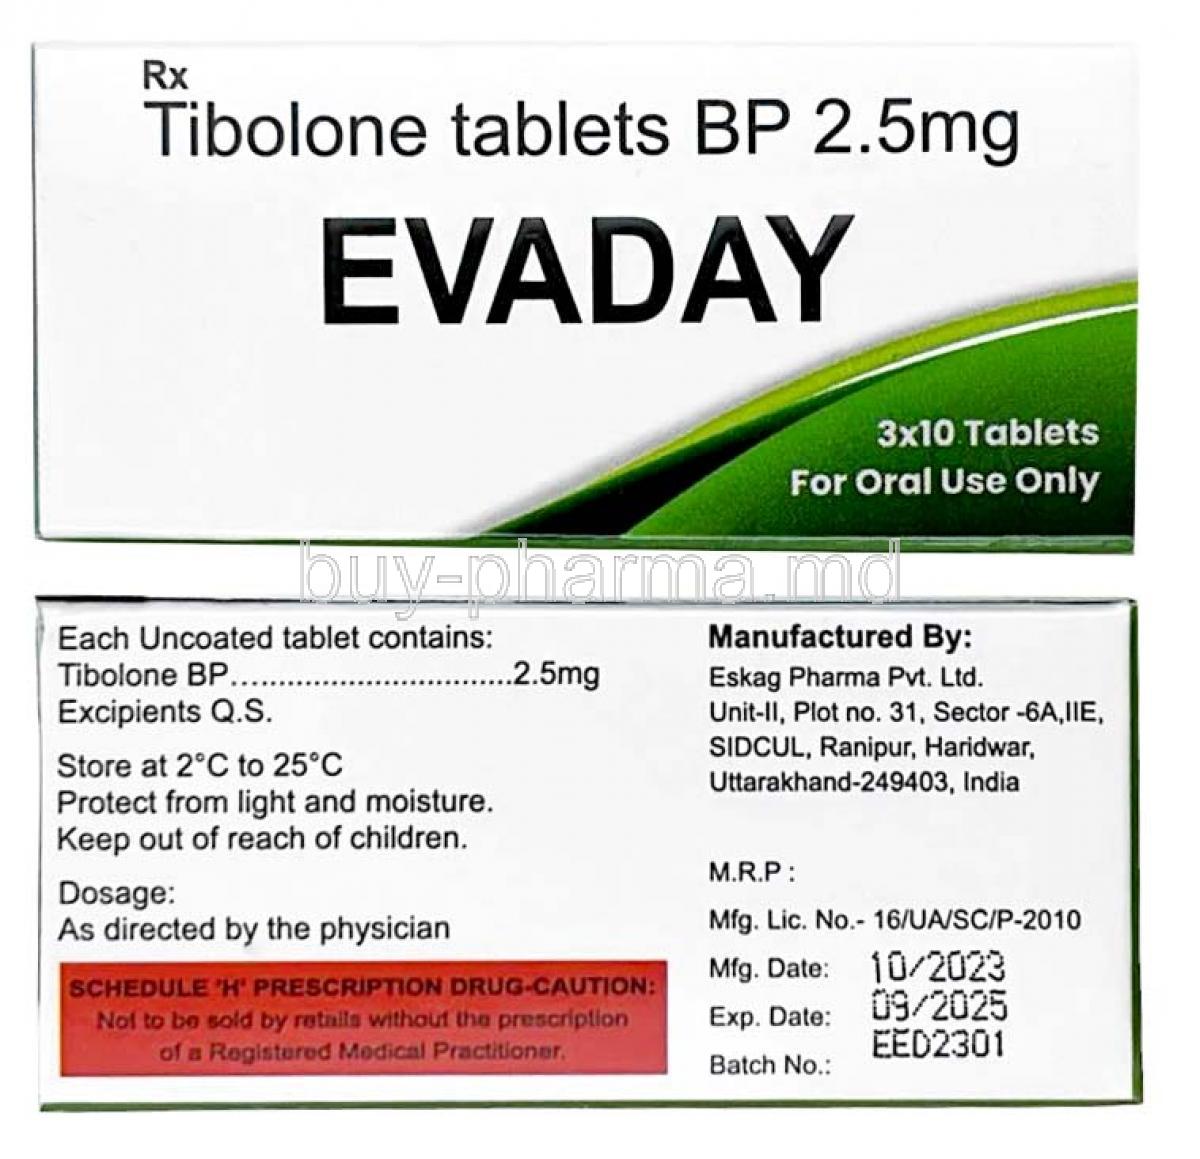 Evaday, Tibolone 2.5mg, VEA Impex, Box front and back view